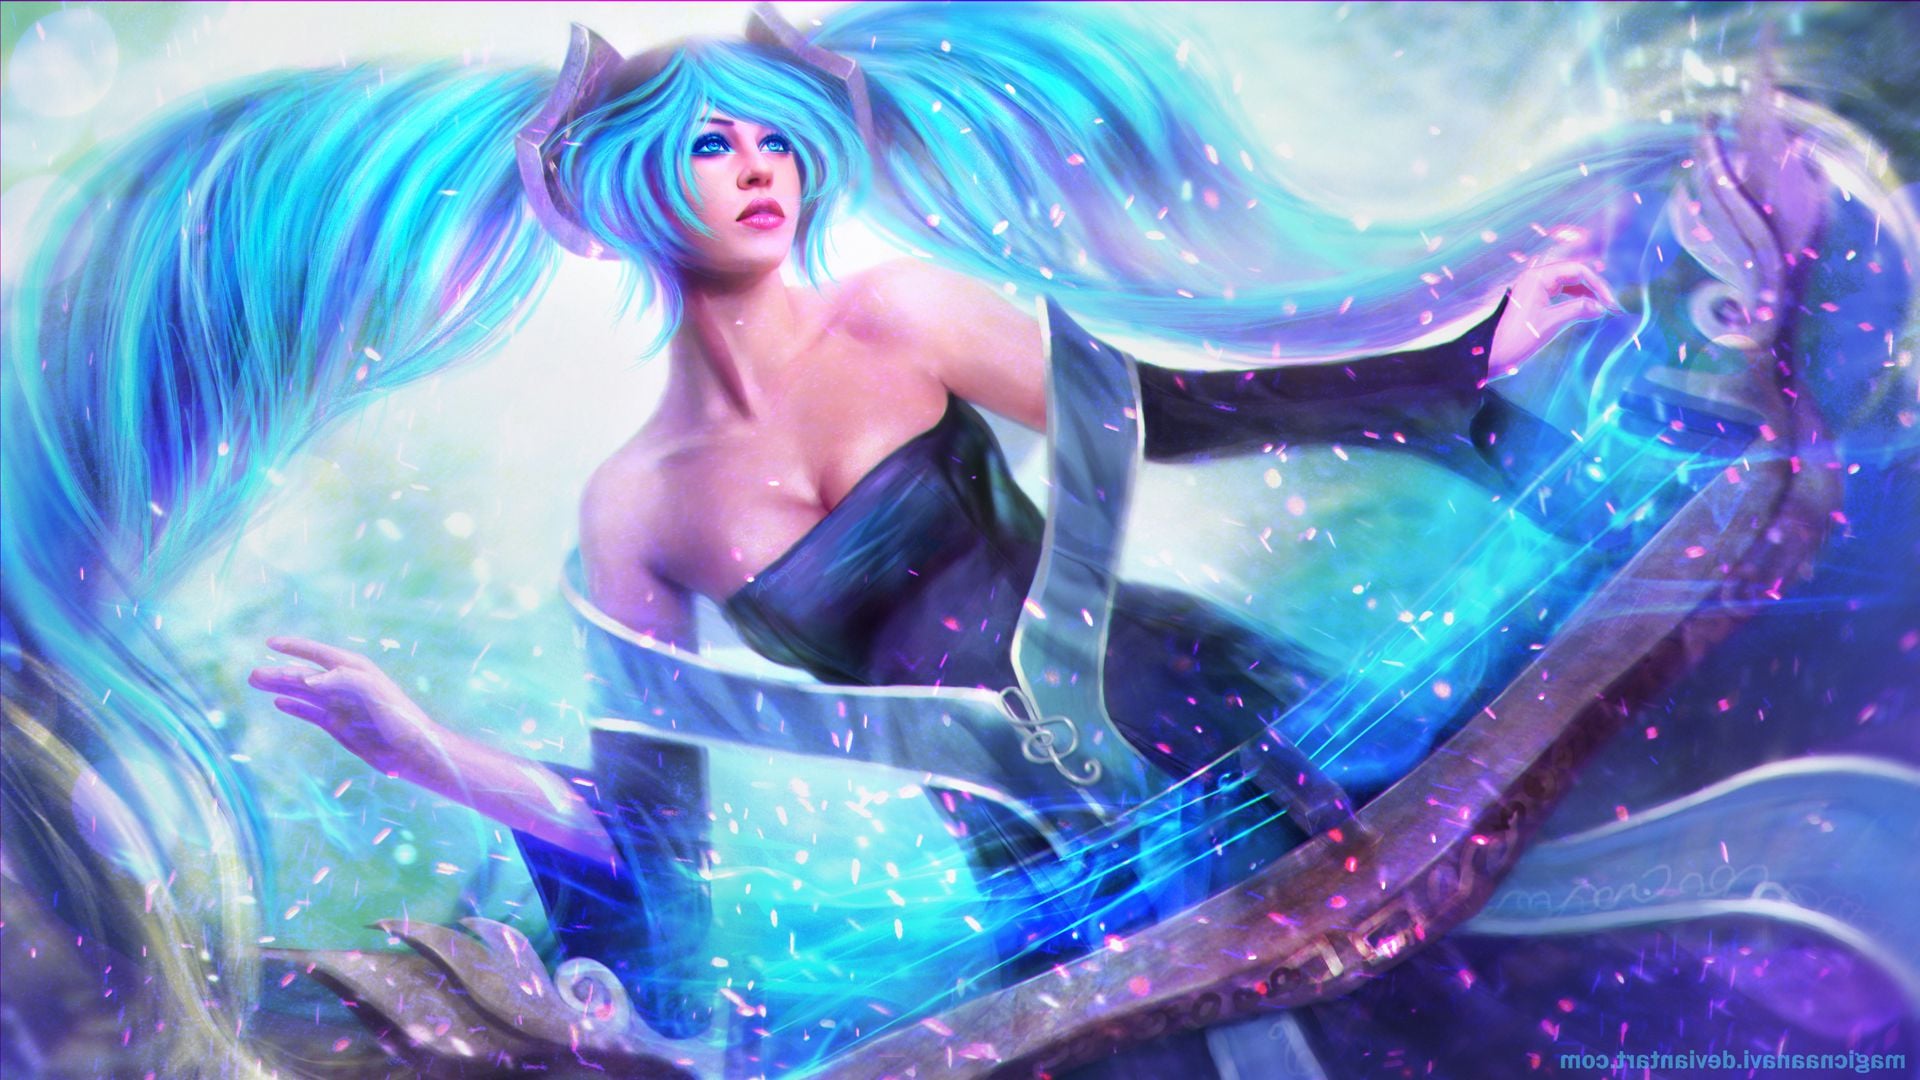 Dj Sona League Of Legends Cosplay Pictures - League Of Legends Wallpaper Sona - HD Wallpaper 